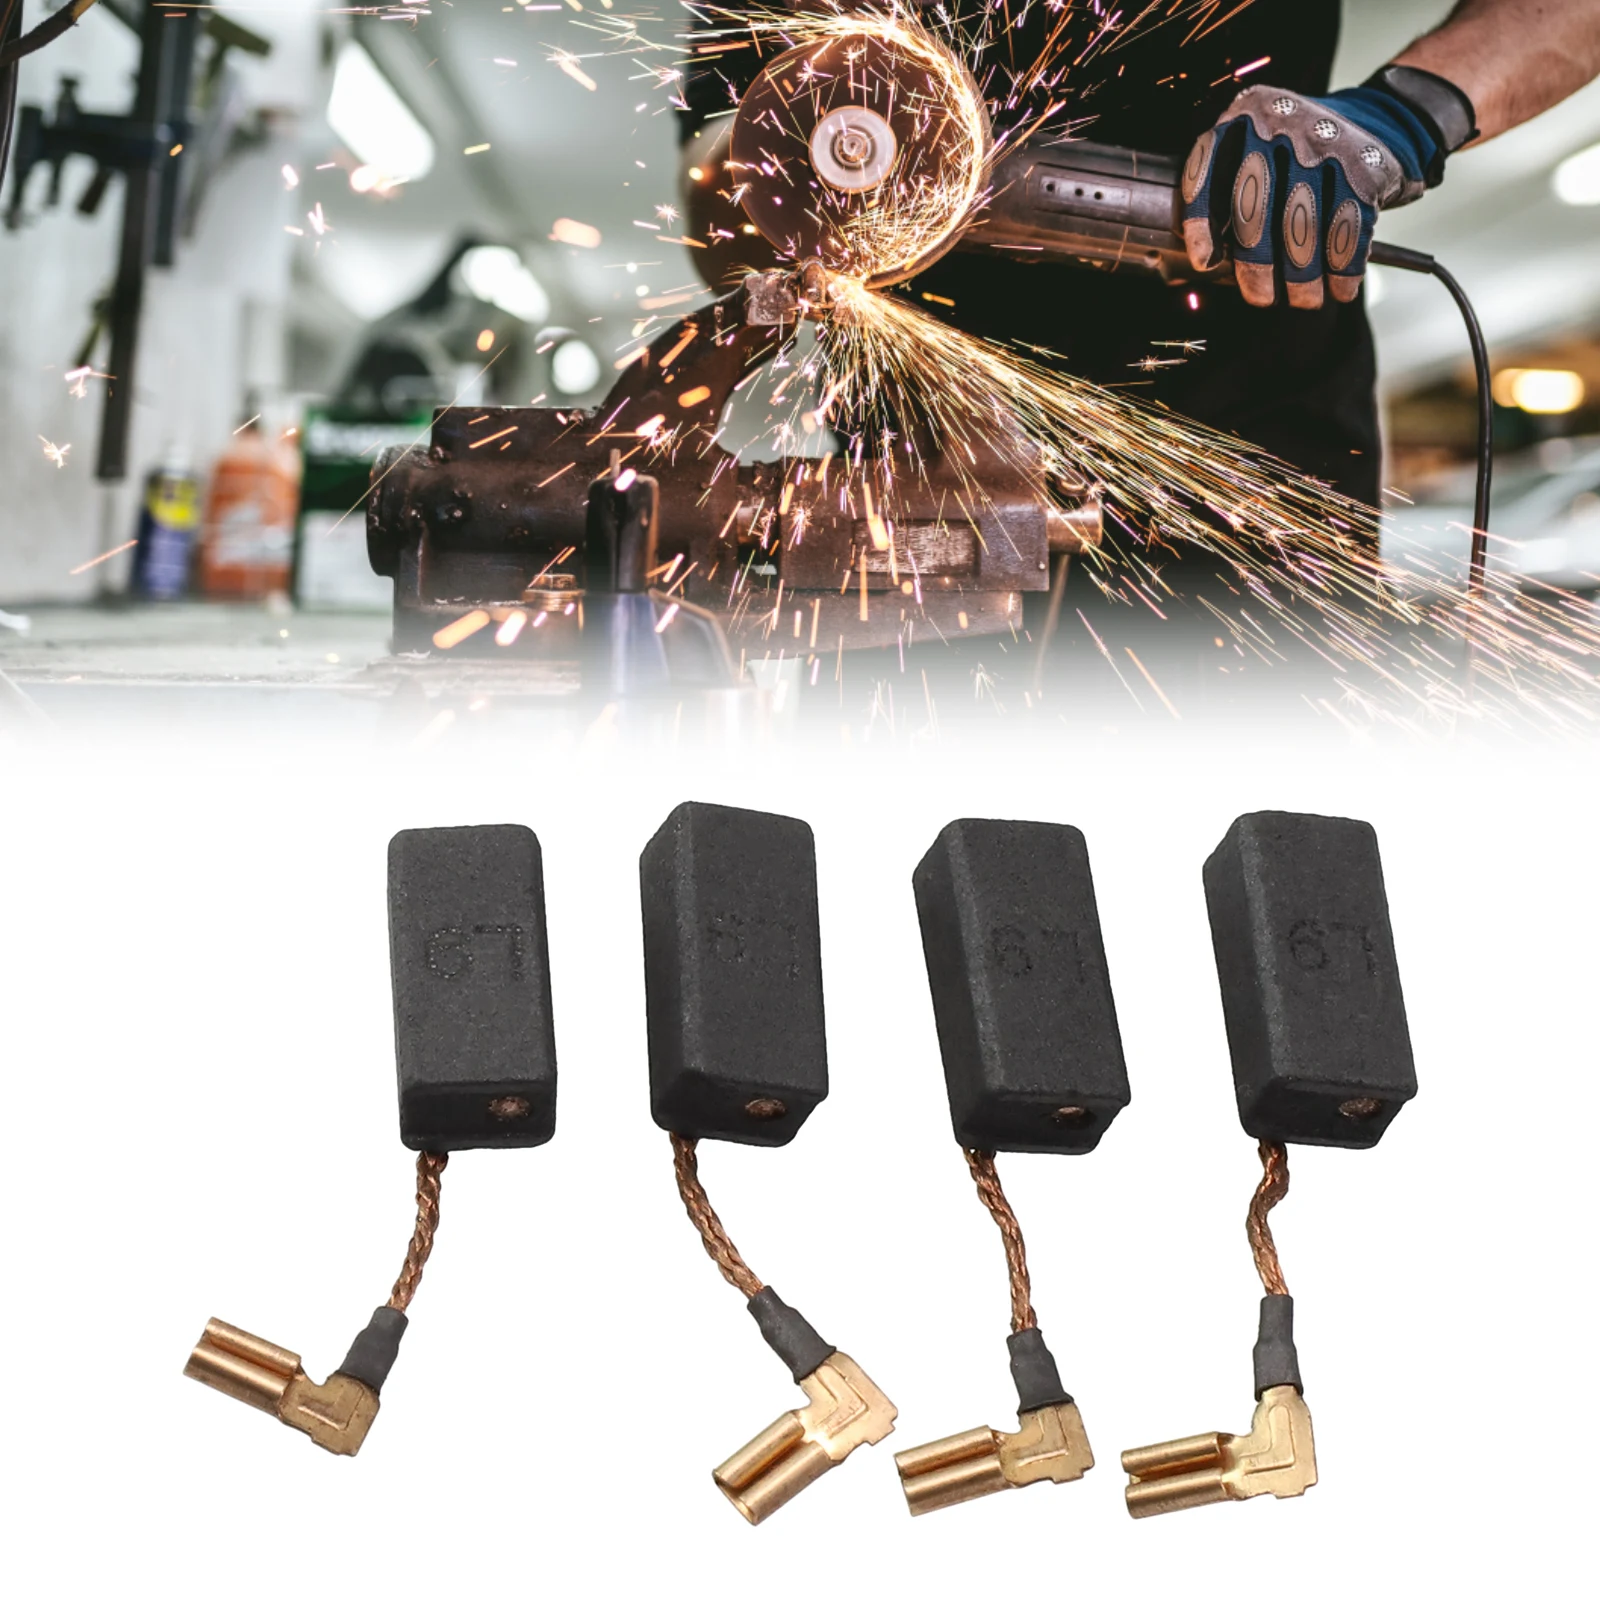 4pcs Carbon Motor Brush DWE4120 DWE4011 N097696 Grinder Motor Replacement Part High Quality Carbon Brushes Durable And Practical start switch current limiter for angle grinder for grinder s motor 110v 20a 1800w current limiter new practical